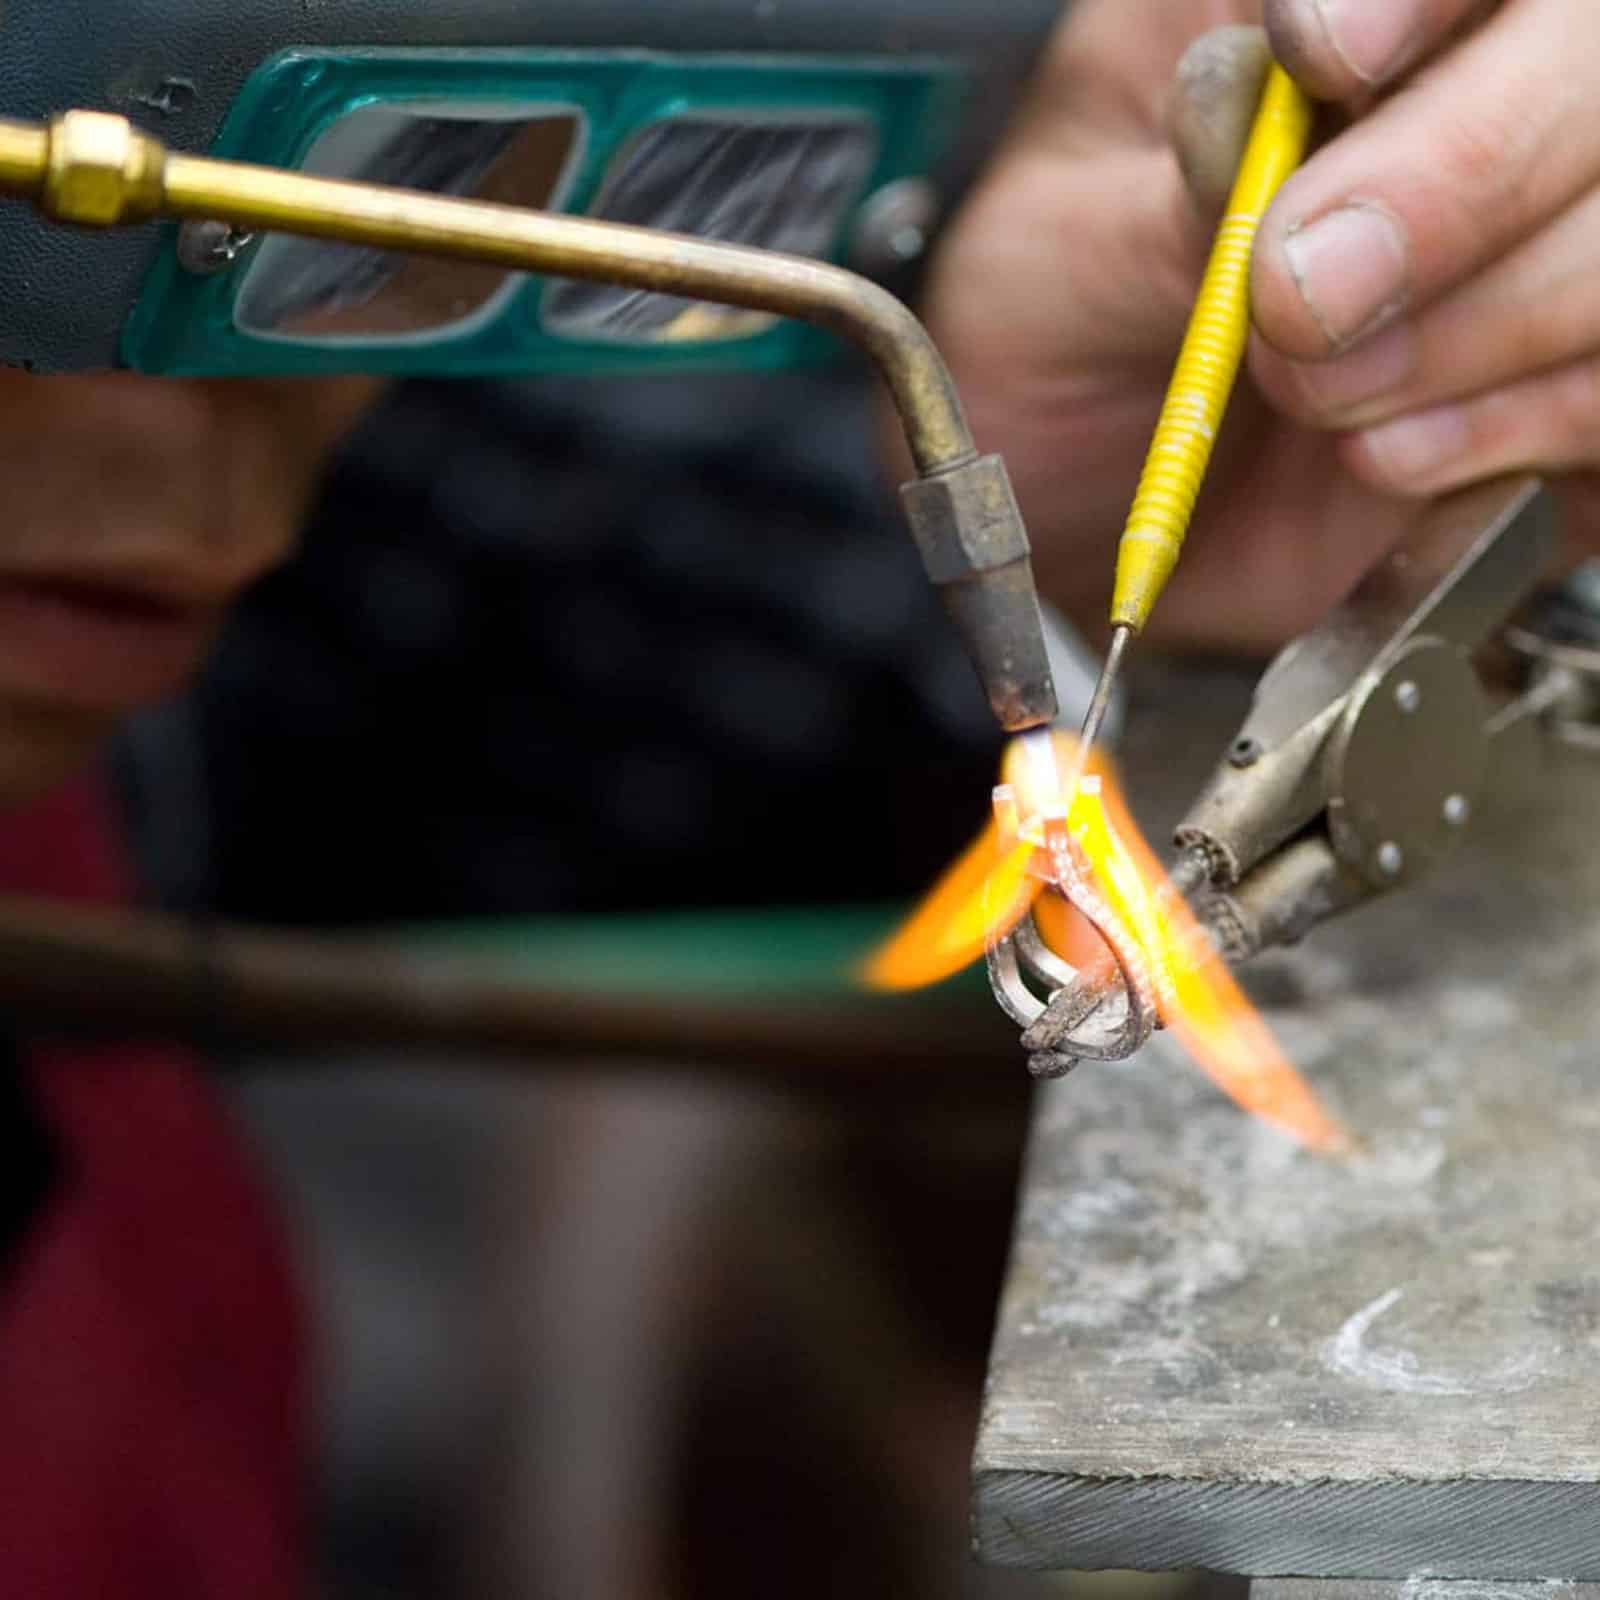 Professional Approach to Repair Jewelry